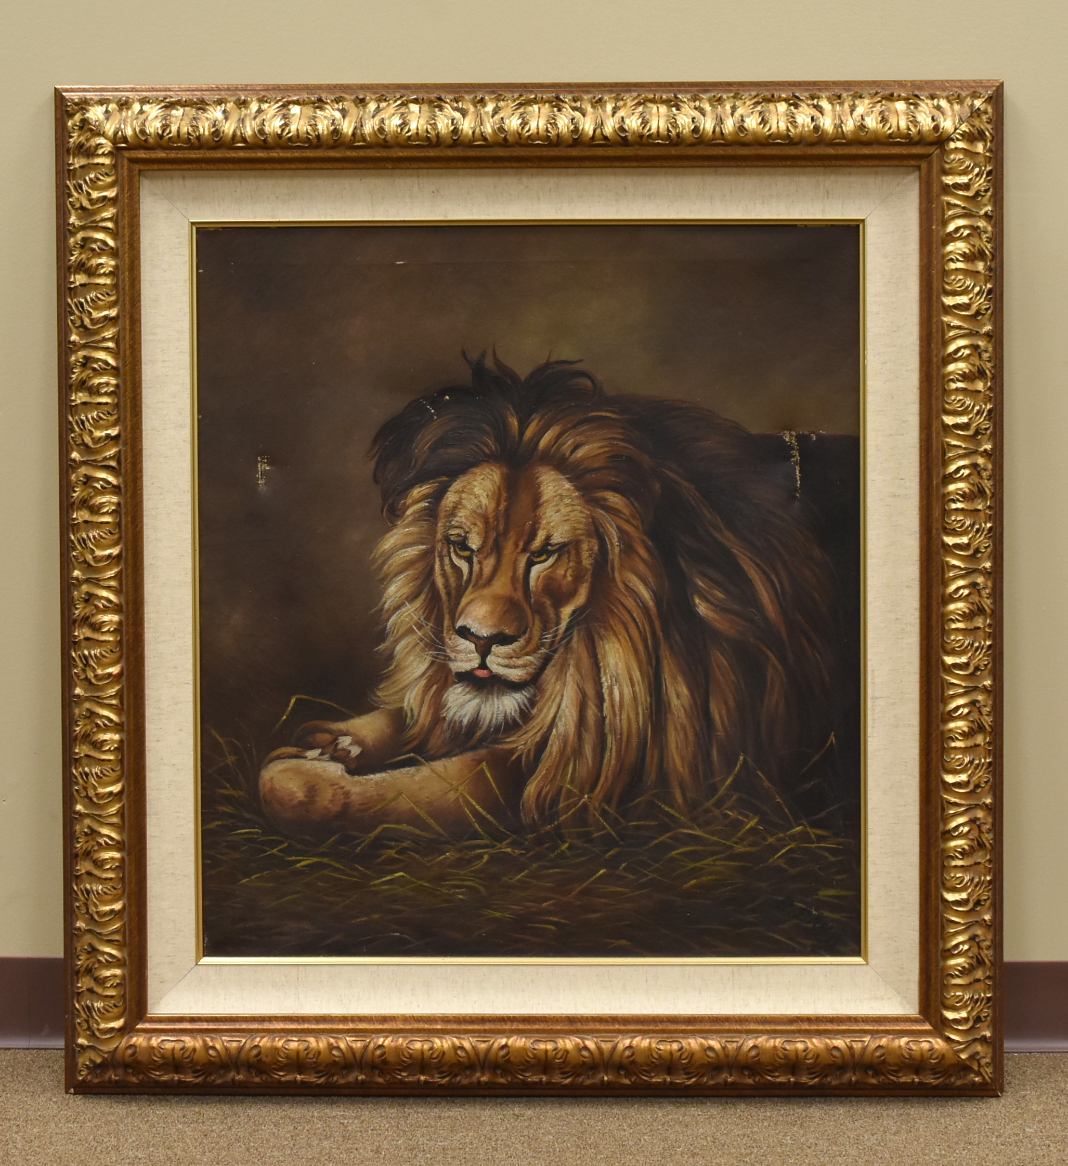 FRAMED OIL PAINTING OF A LION an